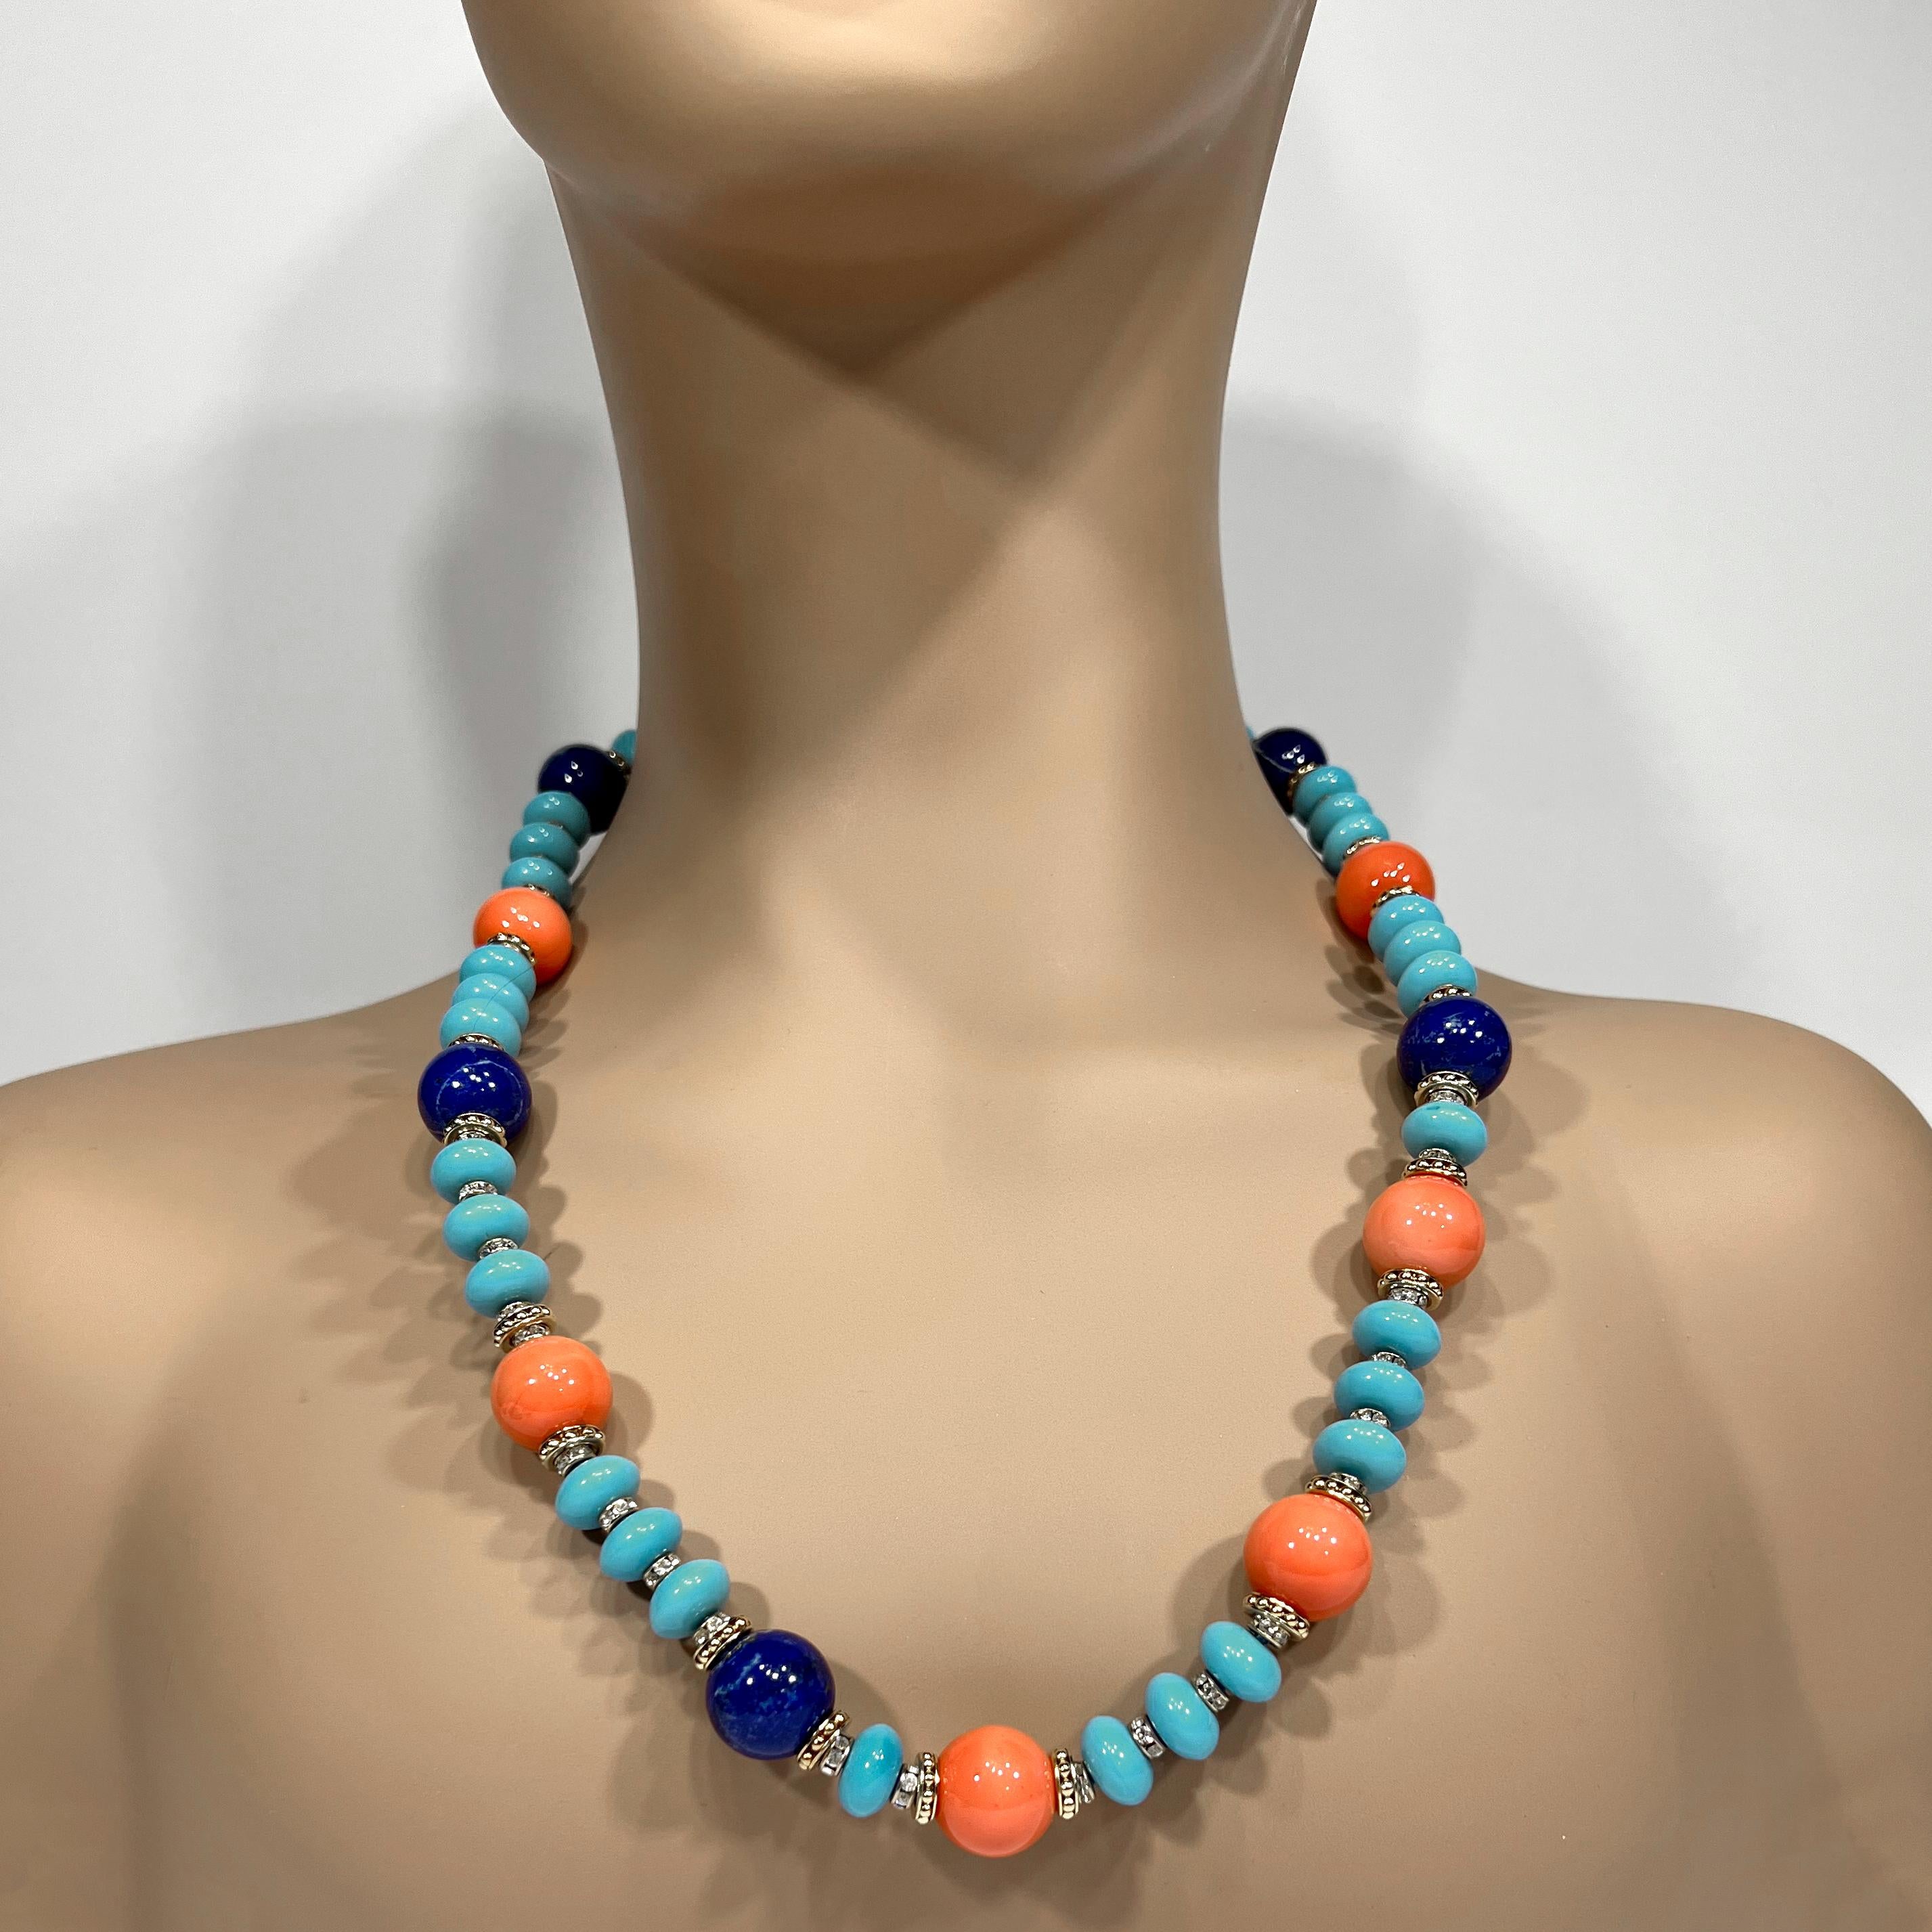 From our Palm Beach Look collection, an elegant strand of man-made 16mm coral, turquoise, lapis-lazuli beads interspersed with gilt and diamante set rondels made to a 25 inch length attached to an easy gilt clasp.  Perfect for layering with similar,